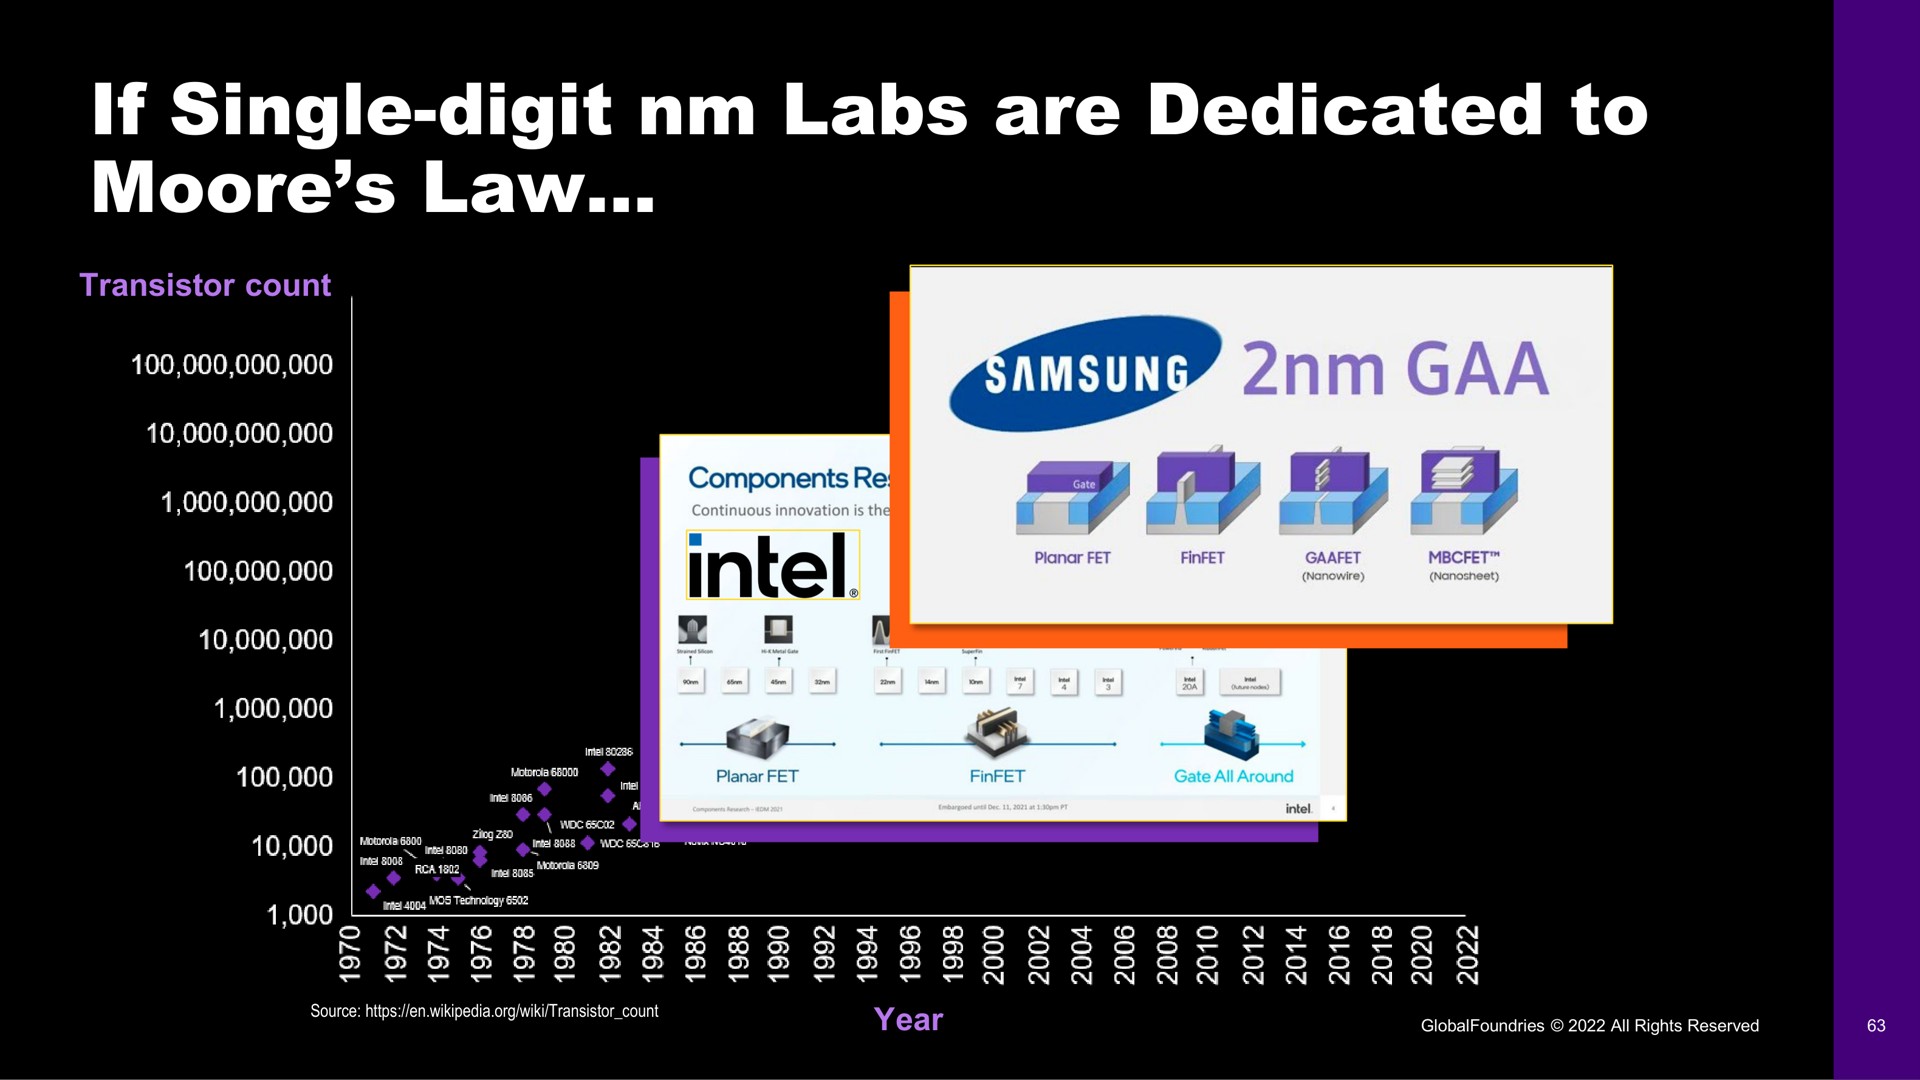 if single digit labs are dedicated to law | GlobalFoundries